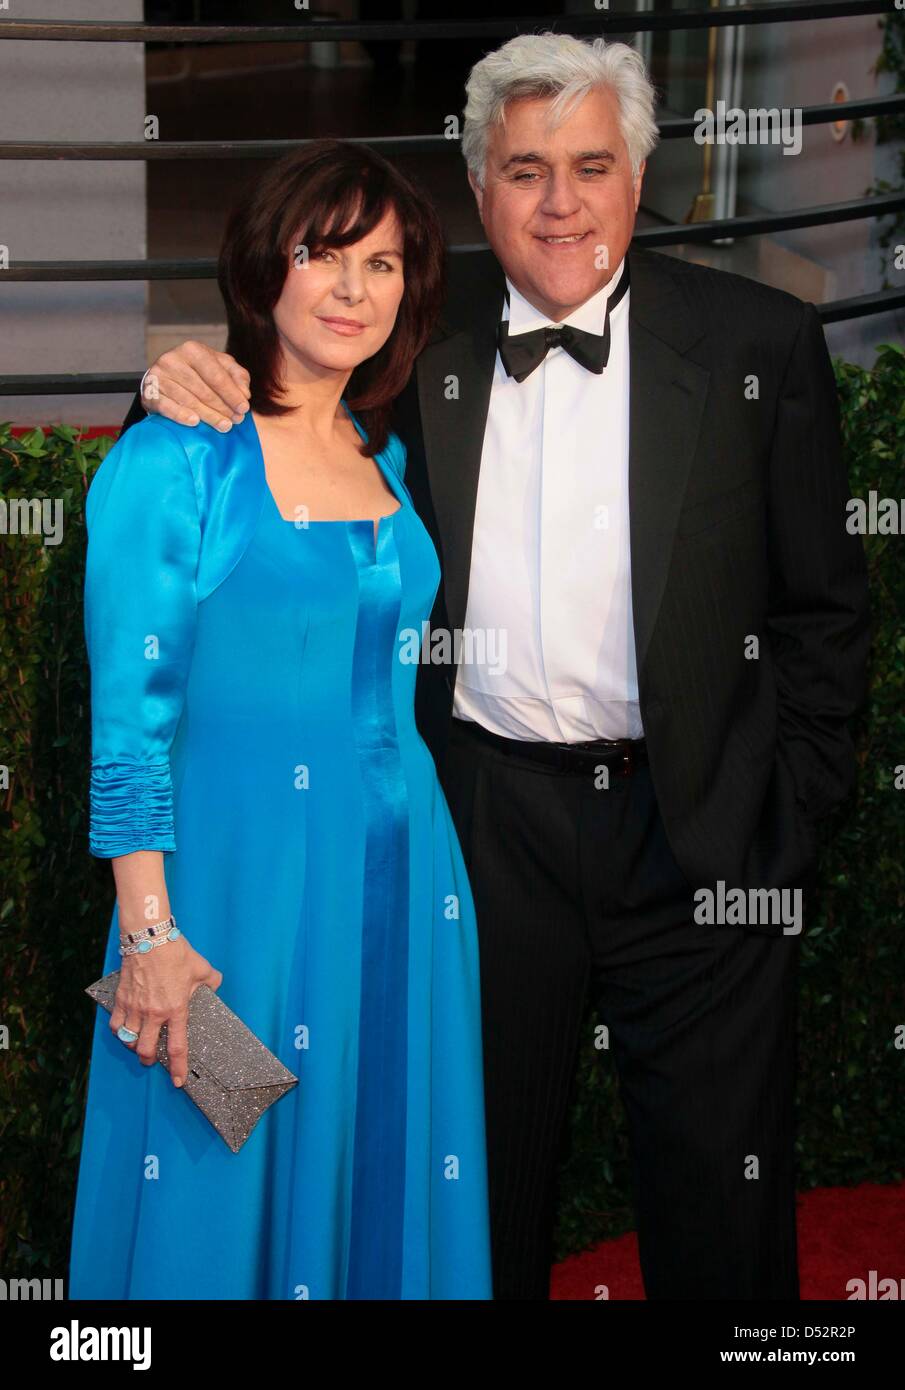 US TV presenter Jay Leno and his wife Mavis Leno arrive at the Vanity Fair Oscar Party at Sunset Tower in Los Angeles, USA, 07 March 2010. Photo: Hubert Boesl Stock Photo